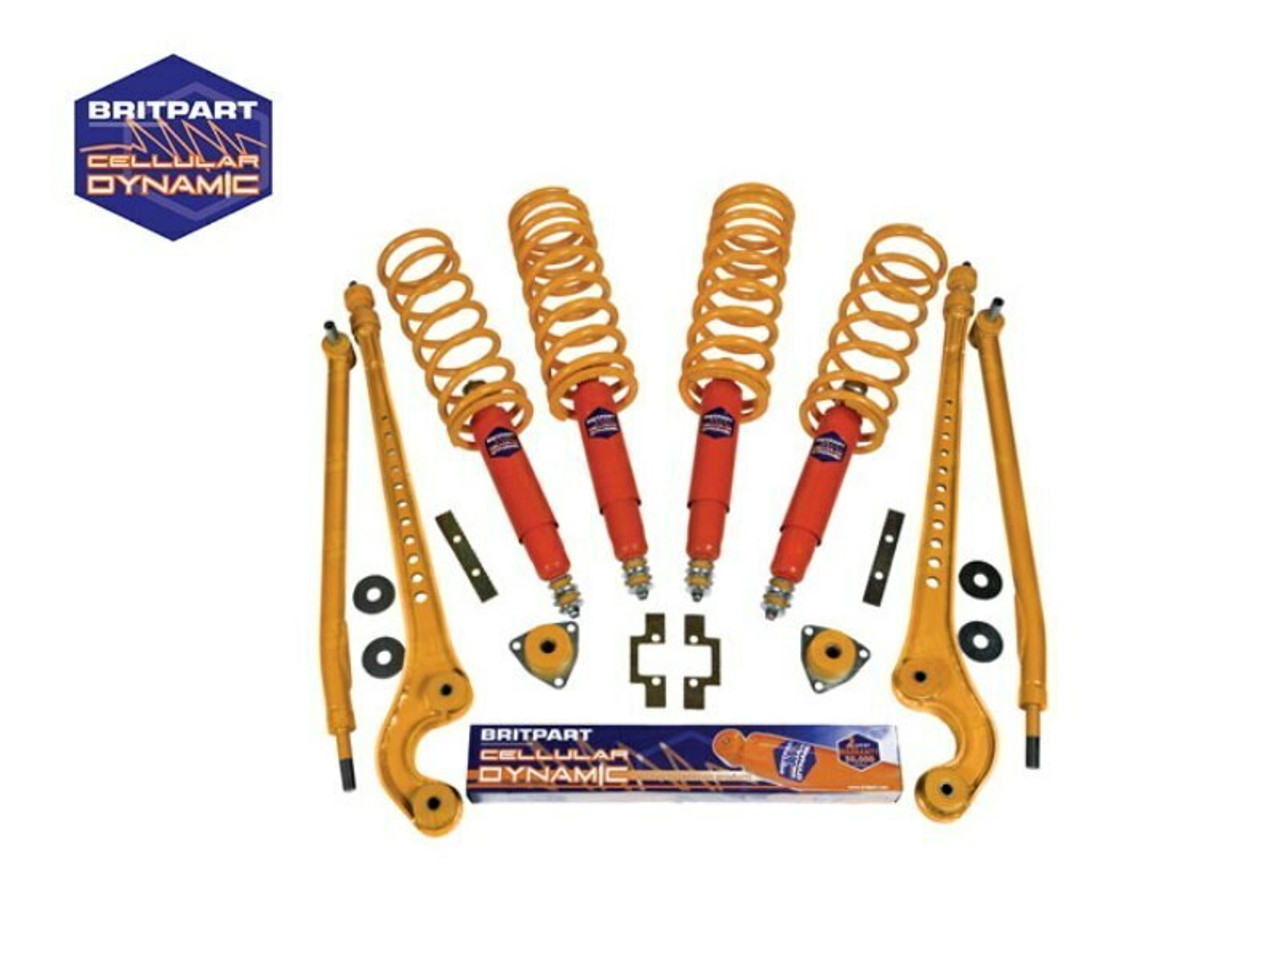 Britpart Cellular Dynamic Light Duty 40mm Lift Full Suspension Kit For Def 90 From 1994, RRC From 1986 and D1